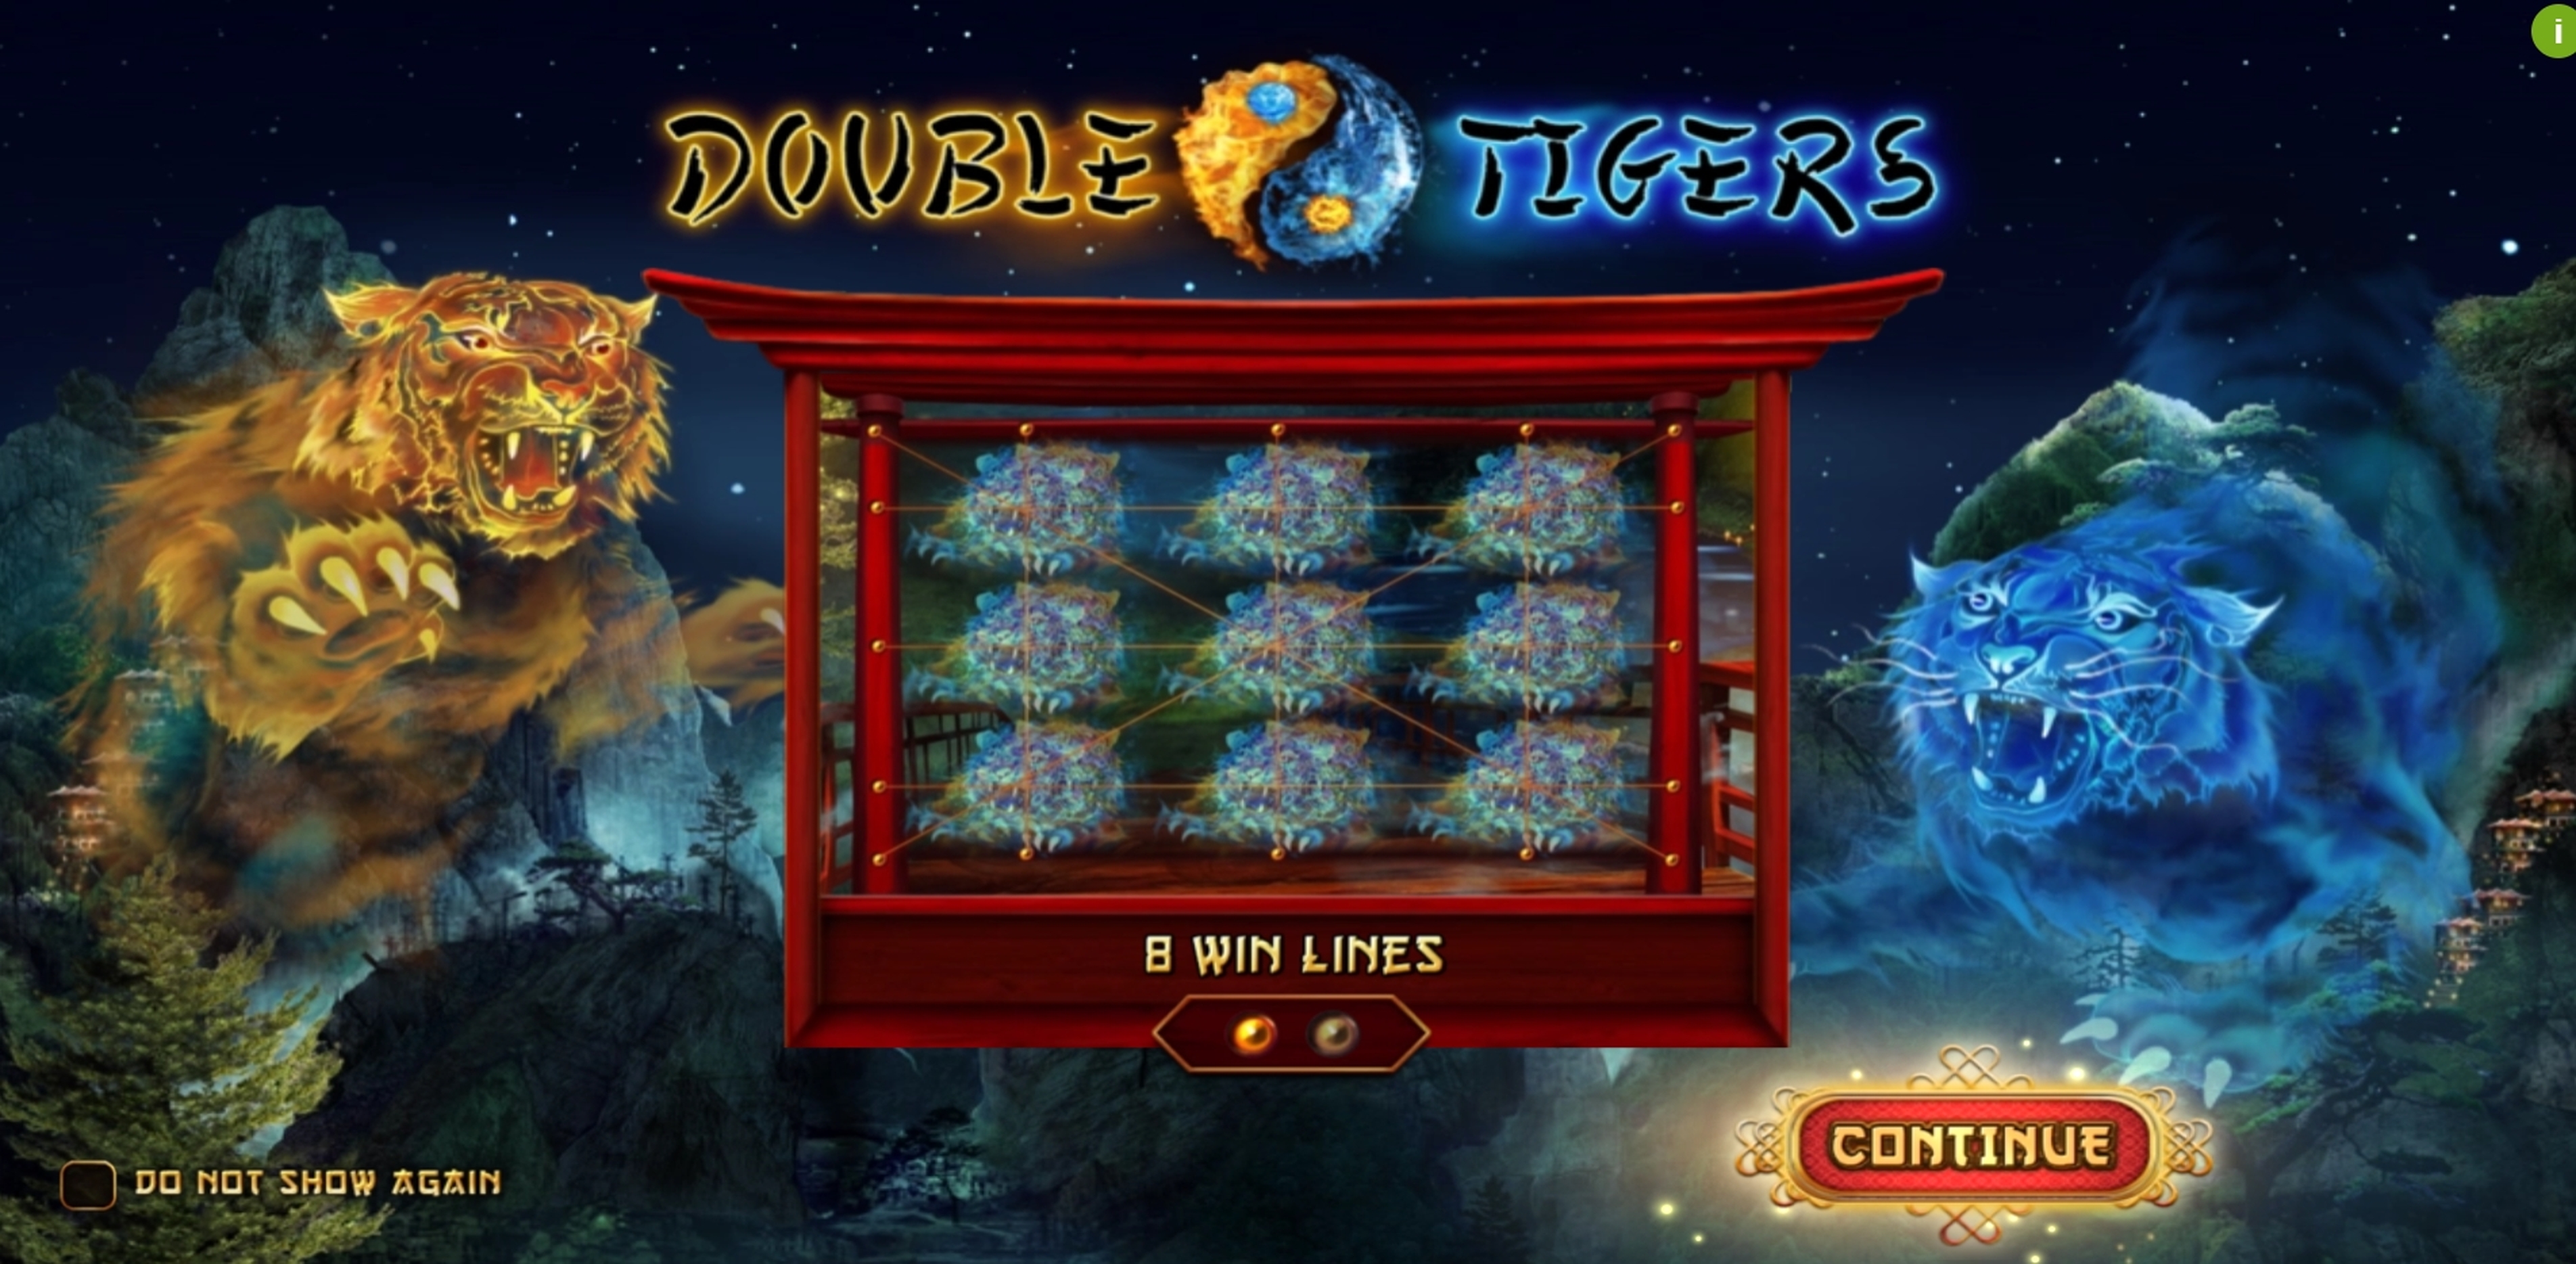 Play Double Tigers Free Casino Slot Game by Wazdan